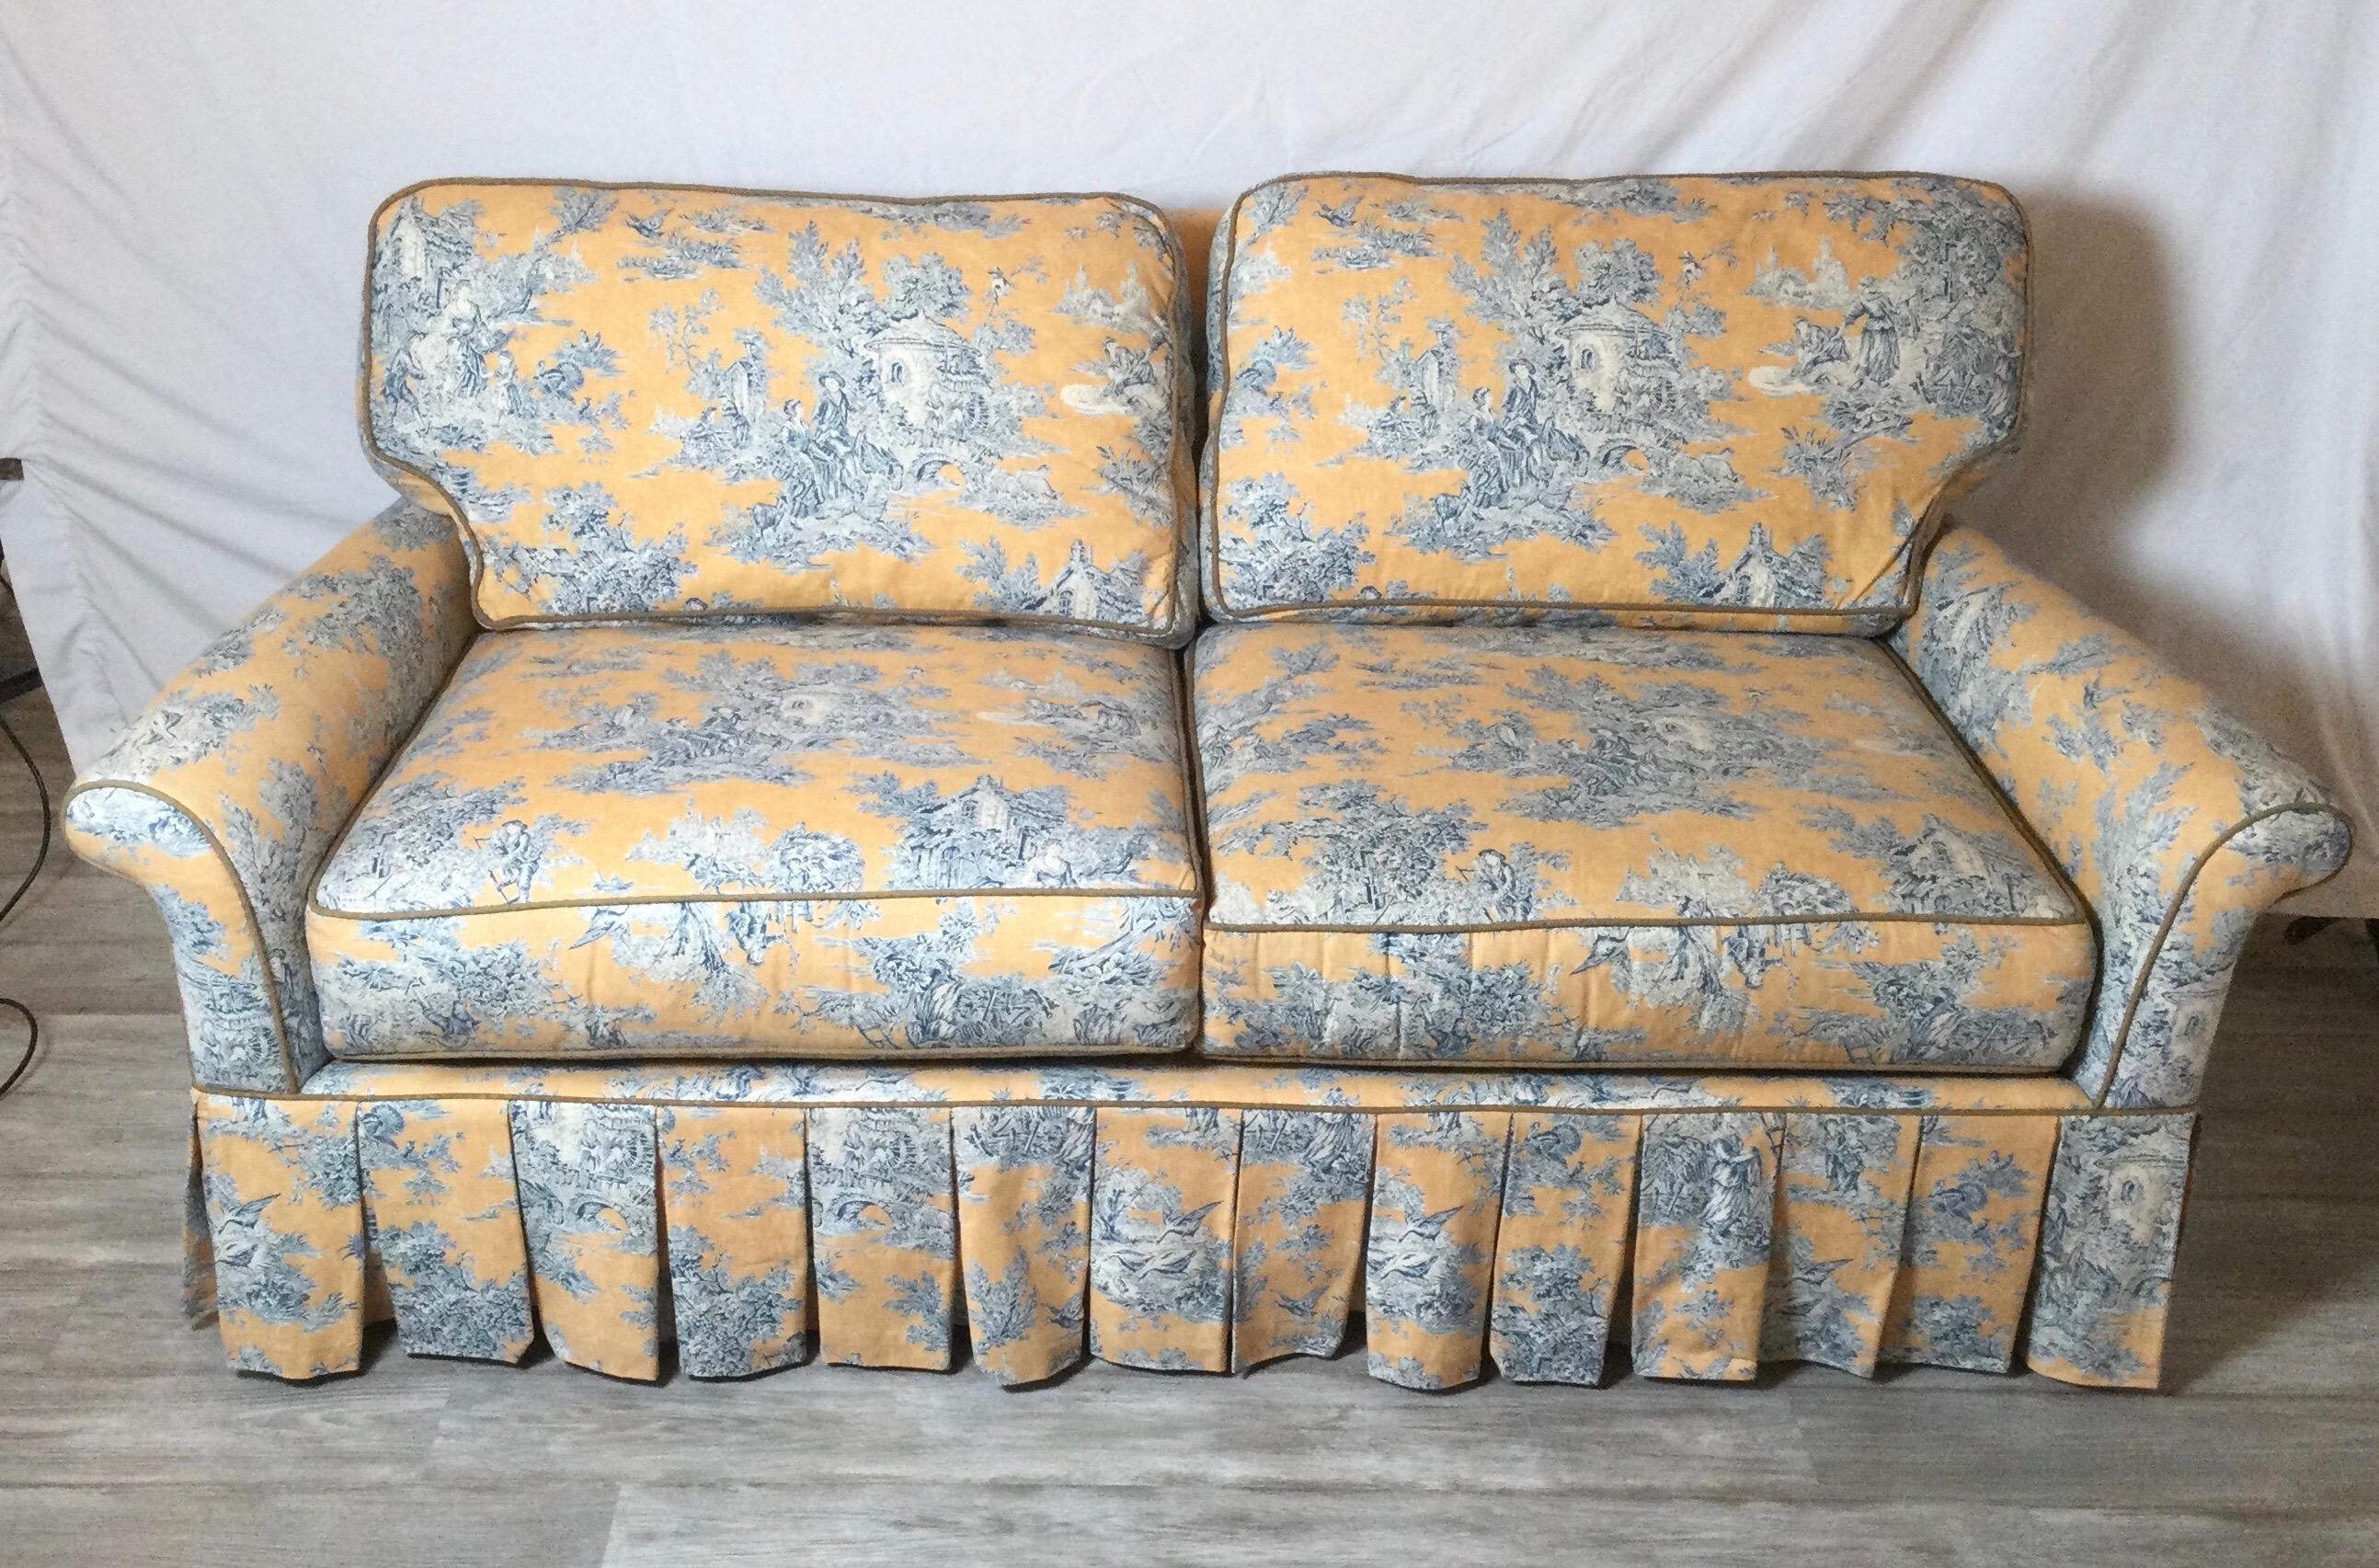 A classic traditional toile upholstered smaller sofa with kiln dried hardwood frame, hand tied hourglass coils and high quality fiber wrapped seat cushions. The smaller rolled arms with a high box pleated skirt. Measures: 76 inches long with a very